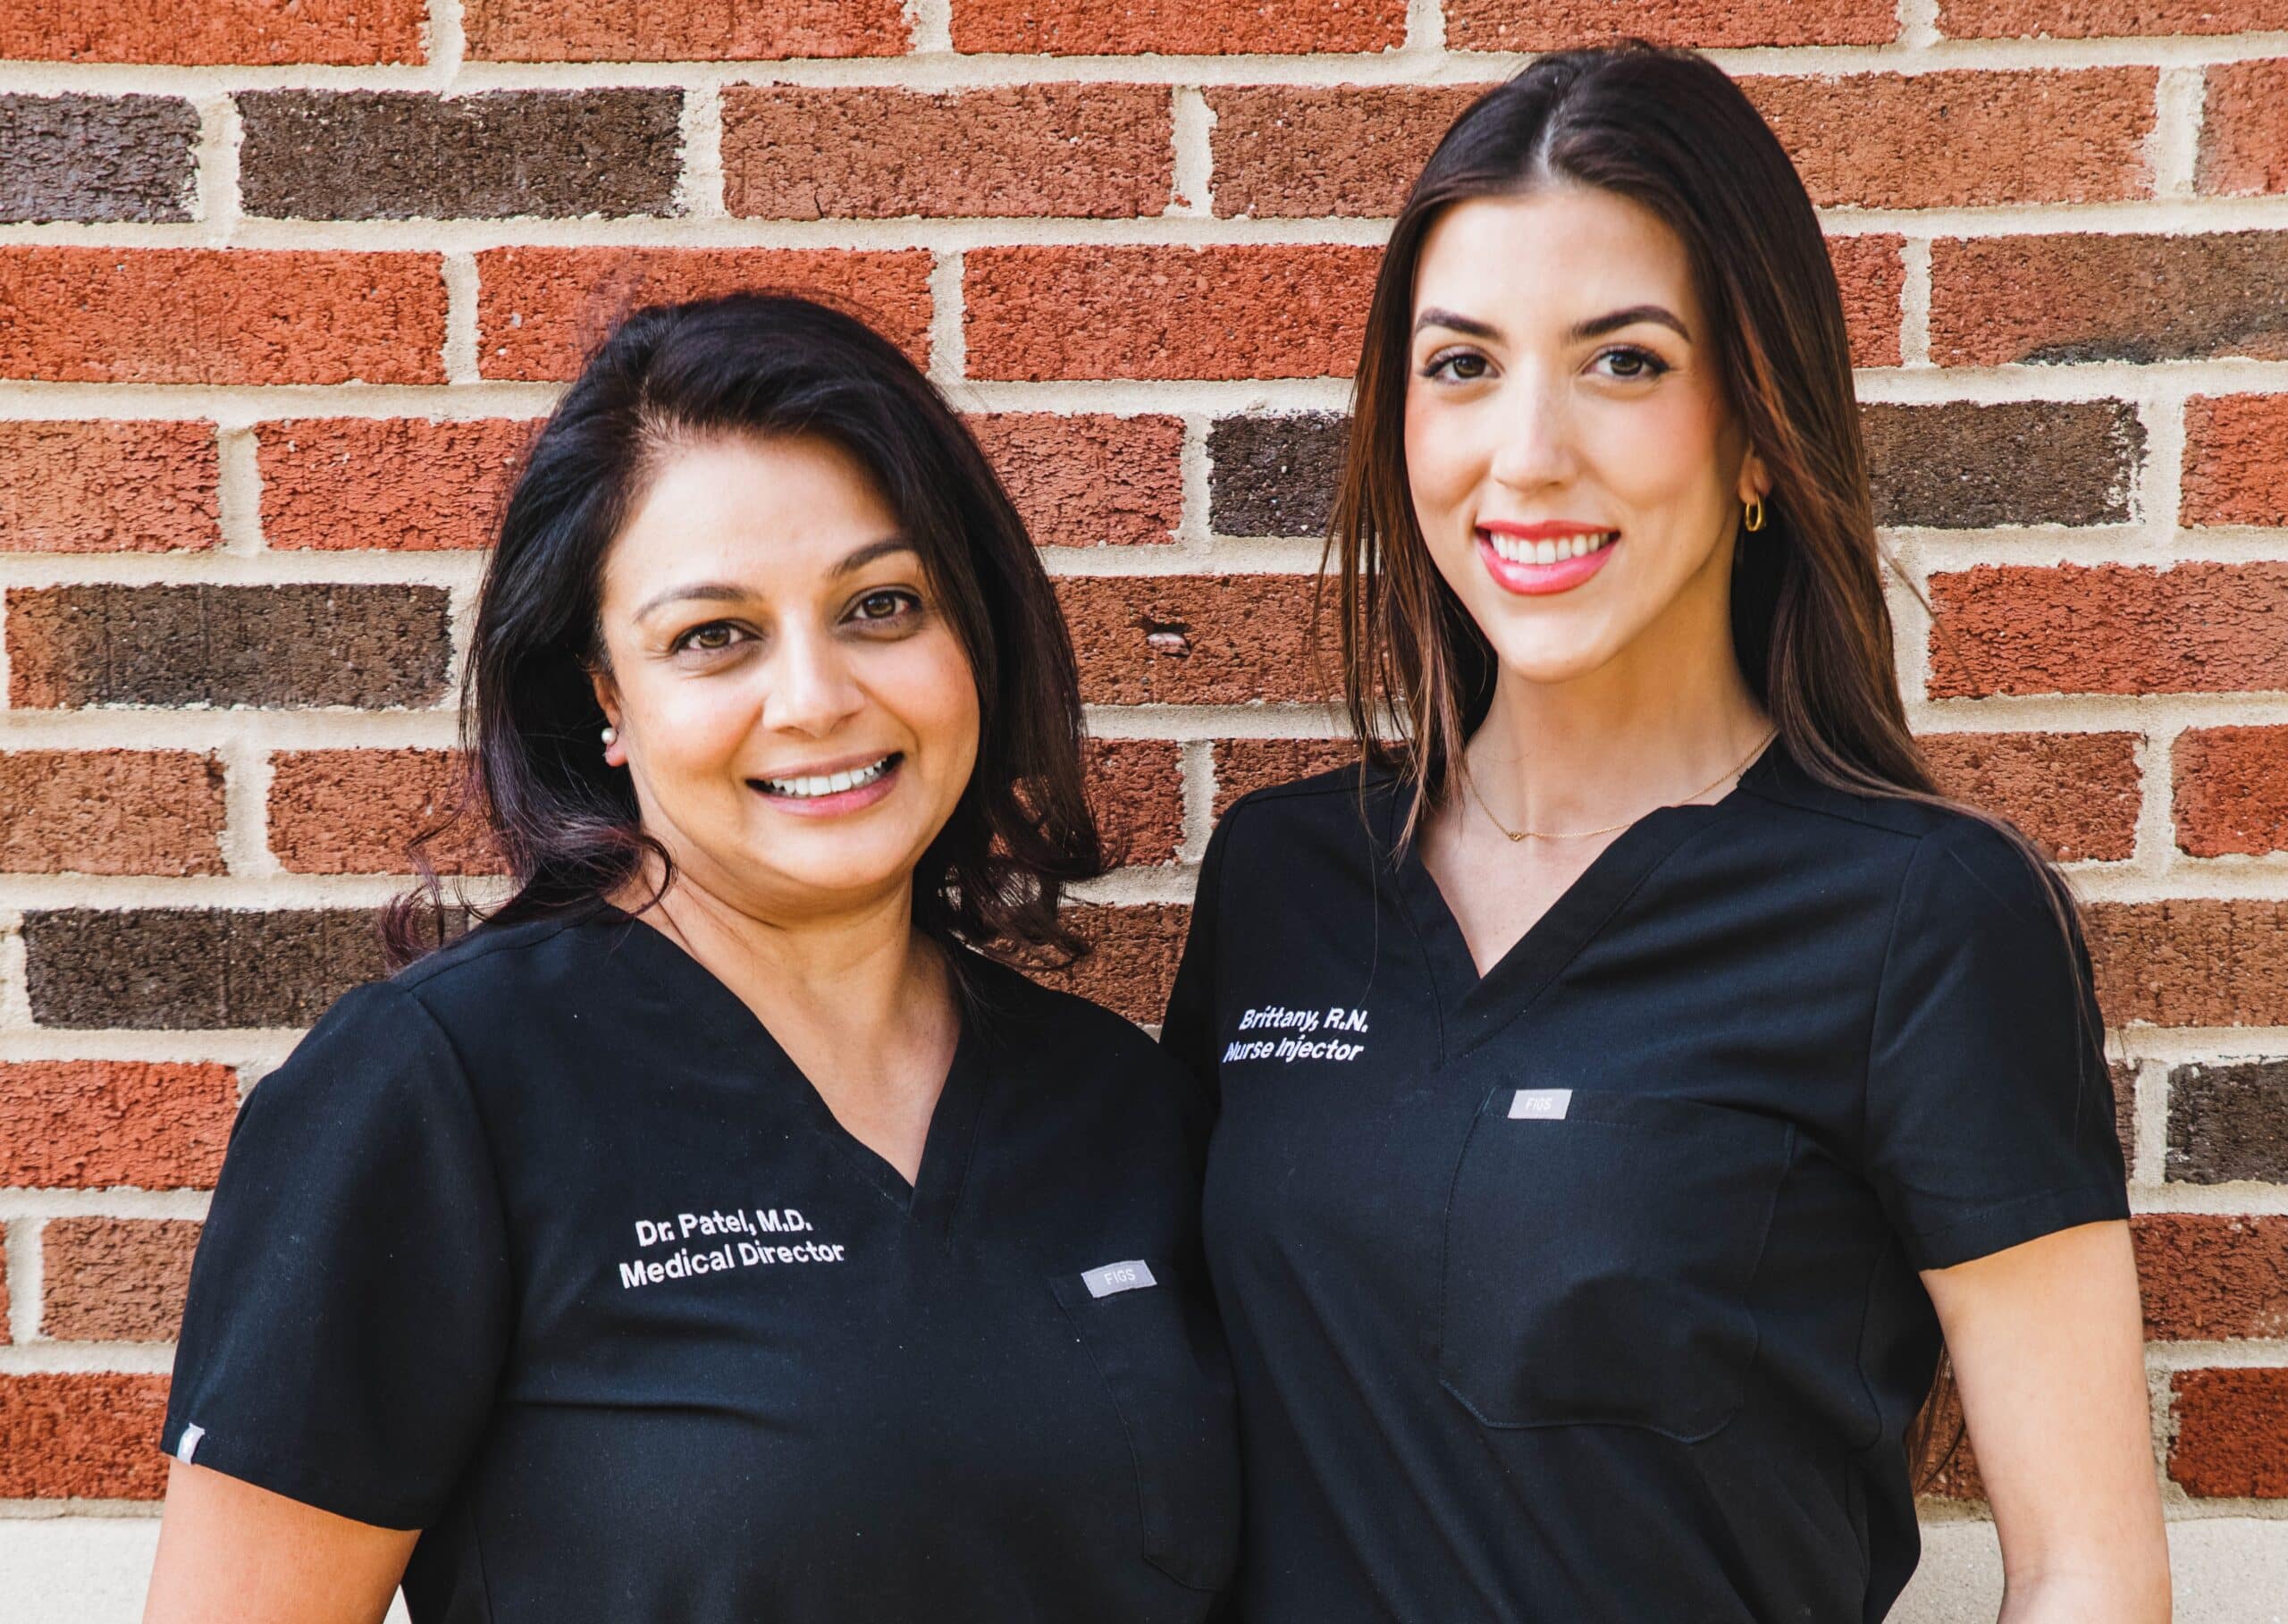 #1 med spa providing medical aesthetics services like Restylane and Juvederm dermal fillers, Hair restoration, weight loss, and laser skin treatments in Charlotte, NC, Rock Hill, and Lancaster, SC.